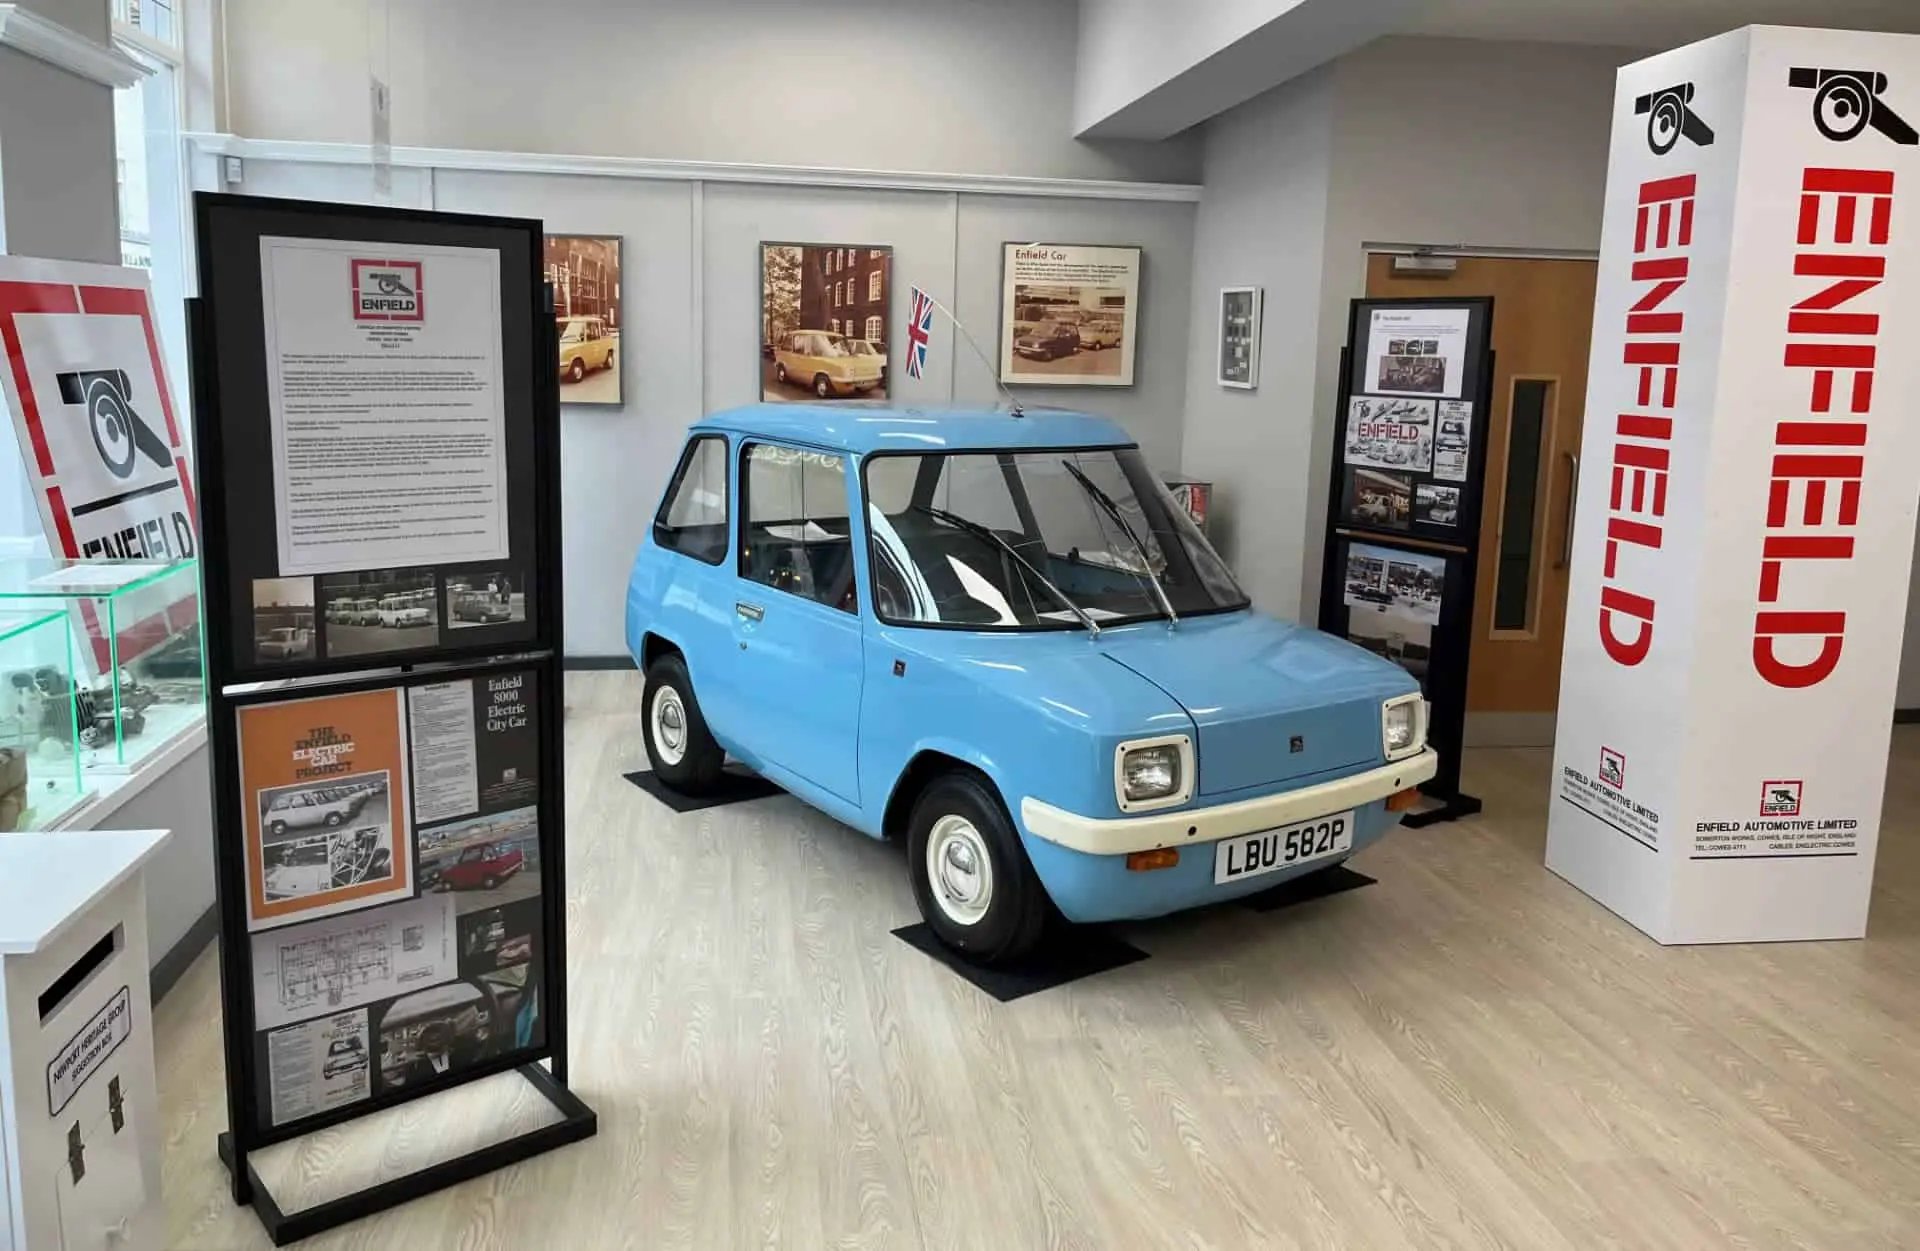 Enfield car in Heritage Society exhibition